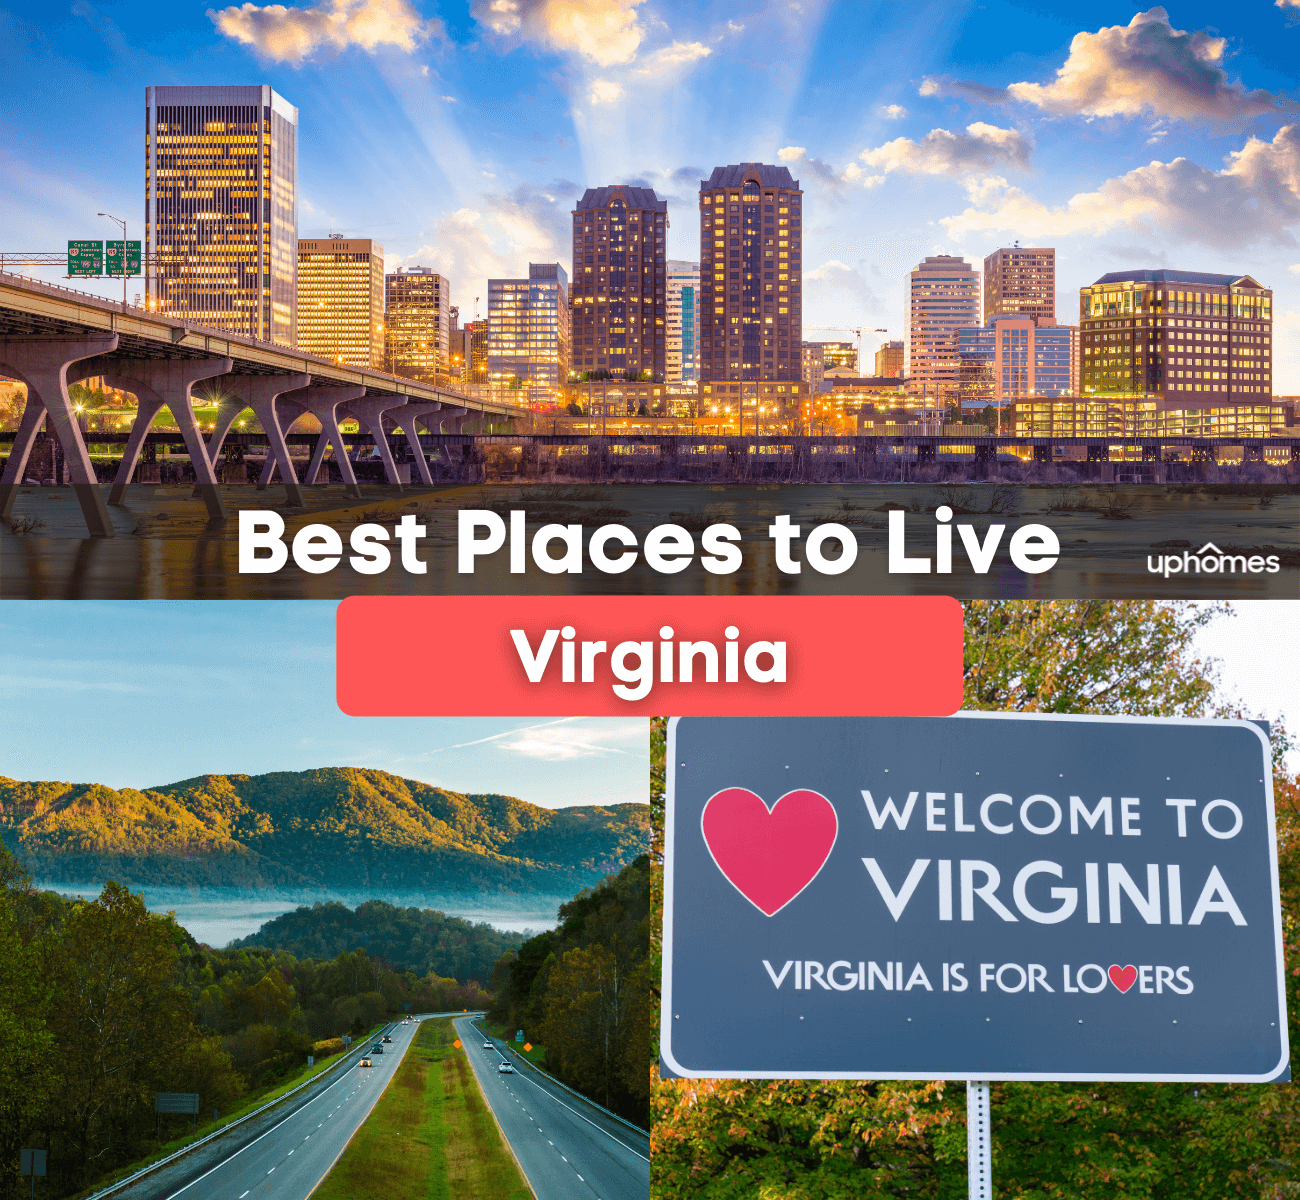 Best Places to Live in Virginia - What are the best neighborhoods in Virginia?